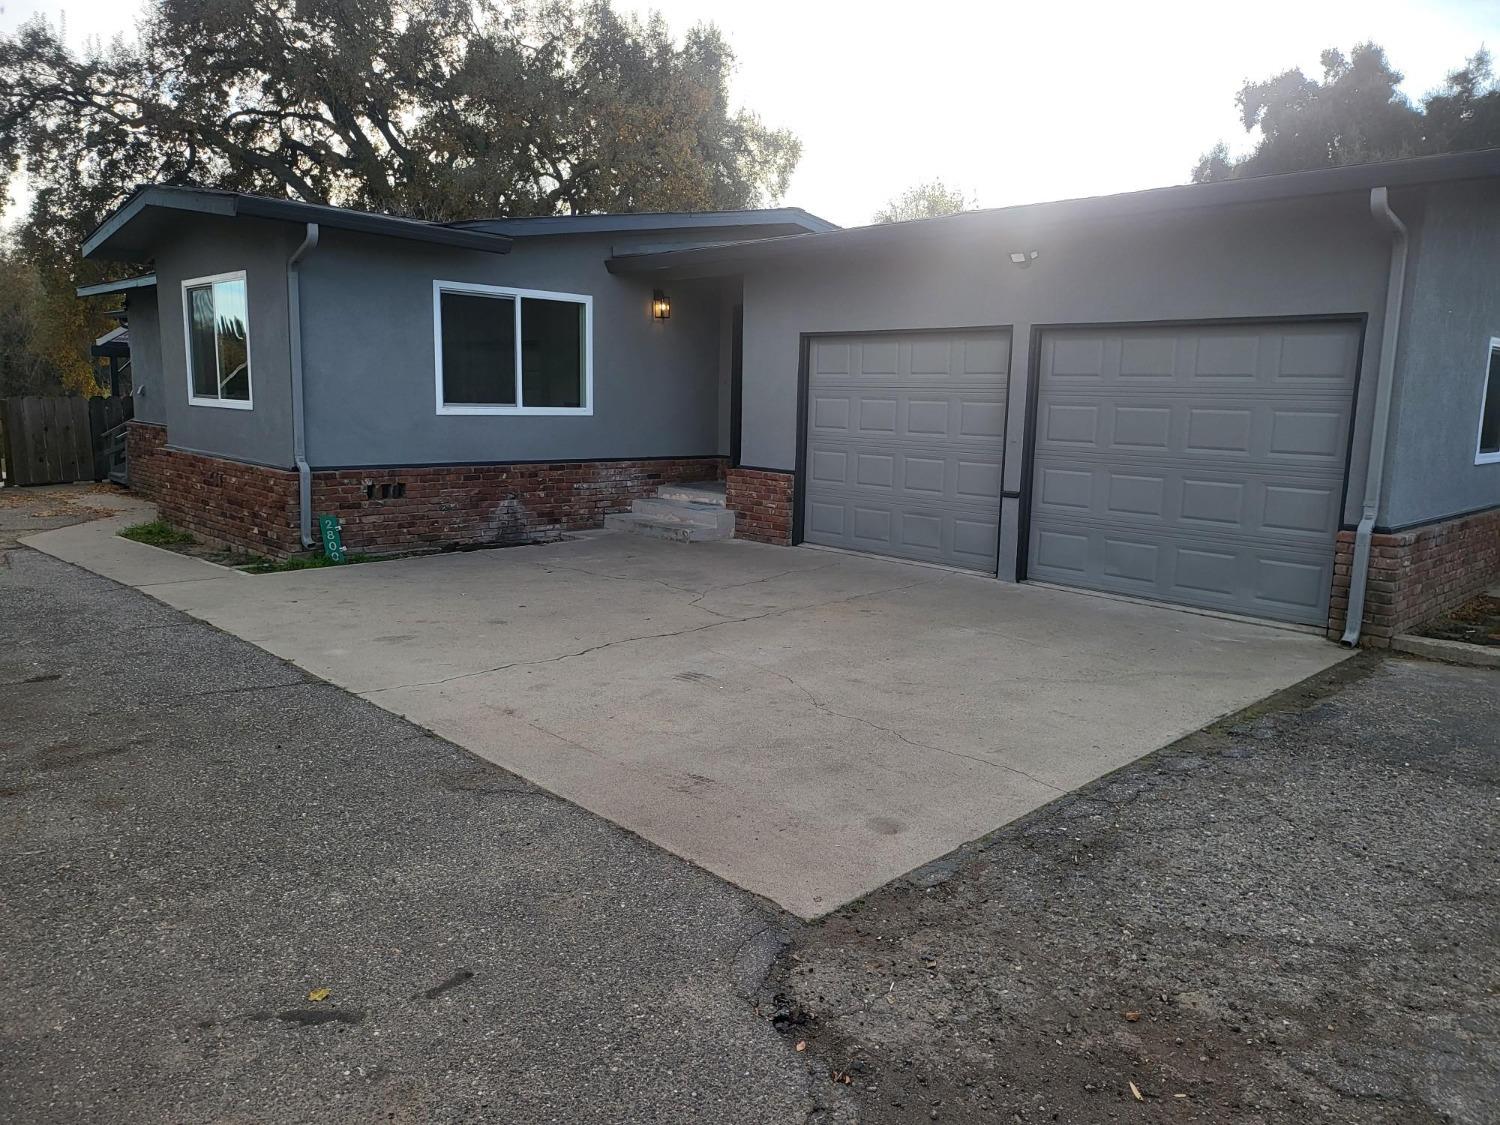 Photo of 2800 Paradise Rd in Modesto, CA